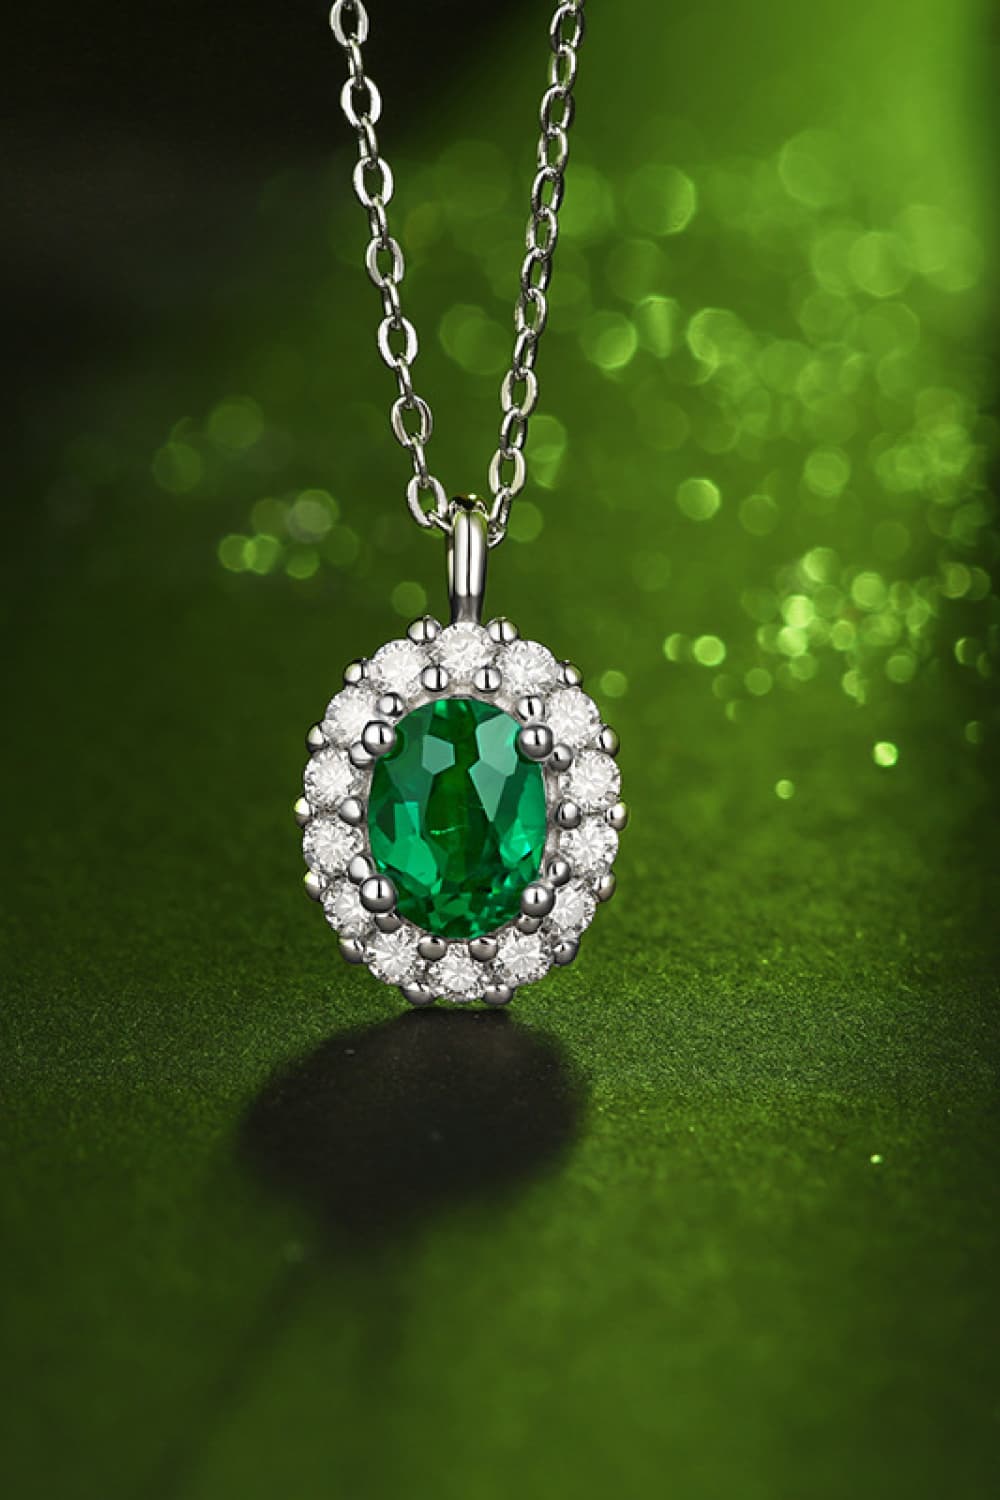 Women’s 1.5 Carat Lab-Grown Emerald 925 Sterling Silver Necklace